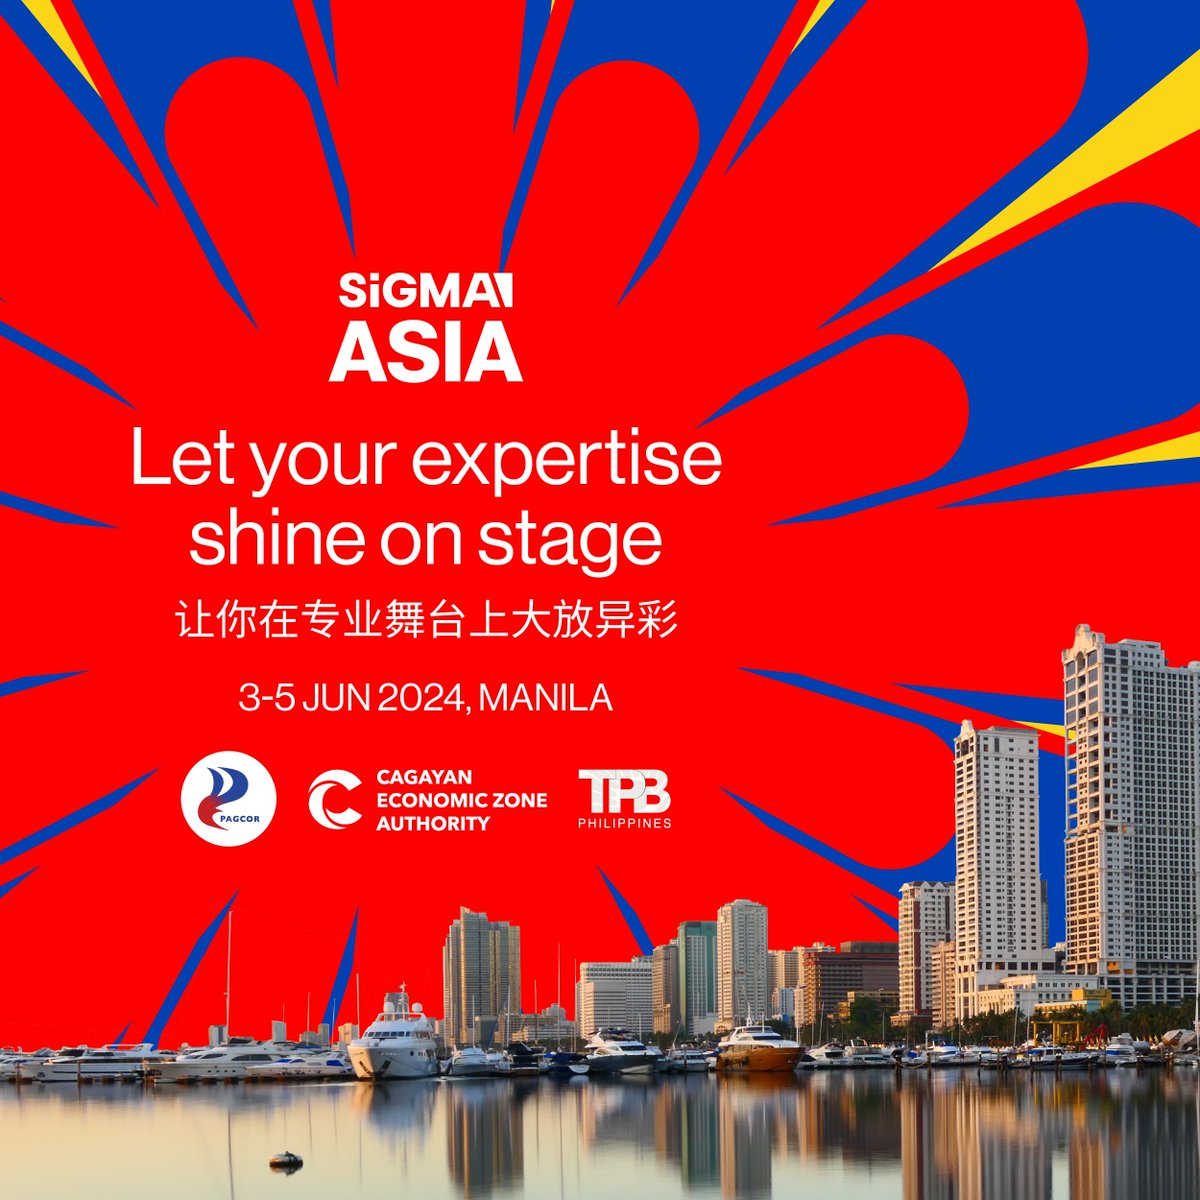 🎙️ Call out for #Speakers for #SiGMAAsia If you are an iGaming expert and you like sharing insights, join us as a speaker for SiGMA Asia 2024 in Manila! Apply here 🗣️ hubs.la/Q02xxmbp0 So, are you ready to make an impact? #SiGMA2024 #SiGMAAsia #speaker #iGaming